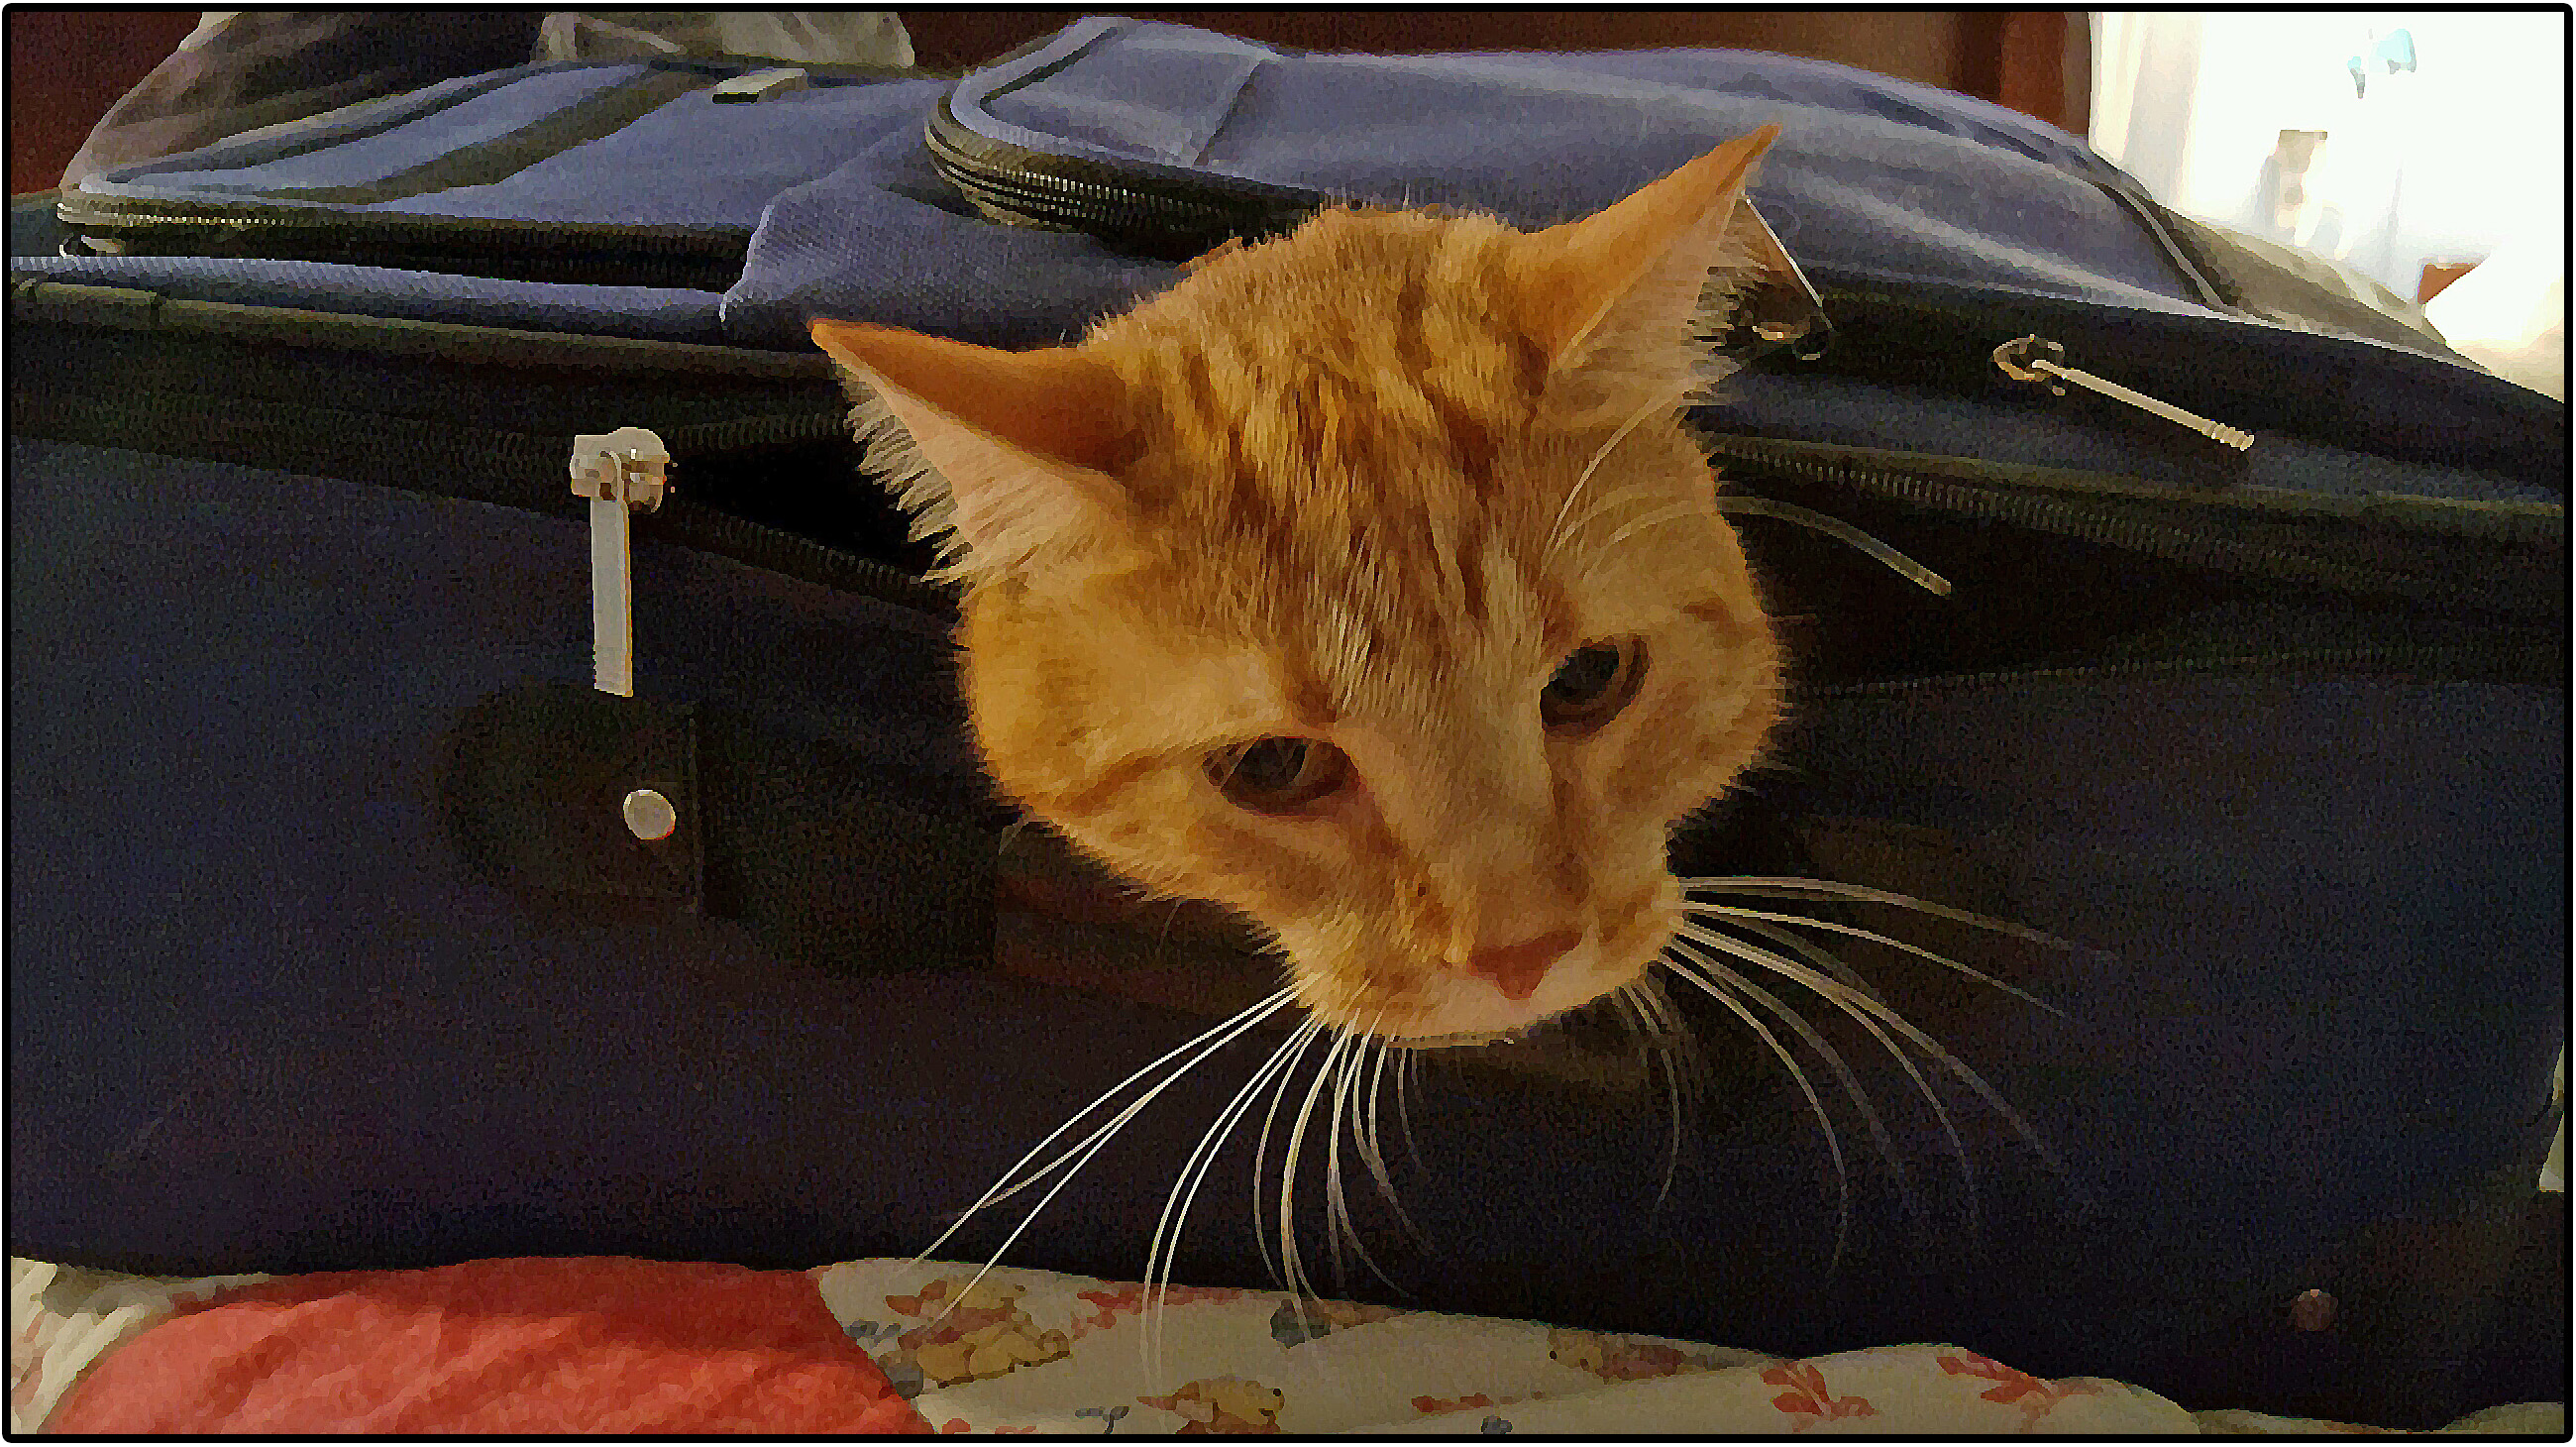 image: This is Oscar the cat in a suitcase